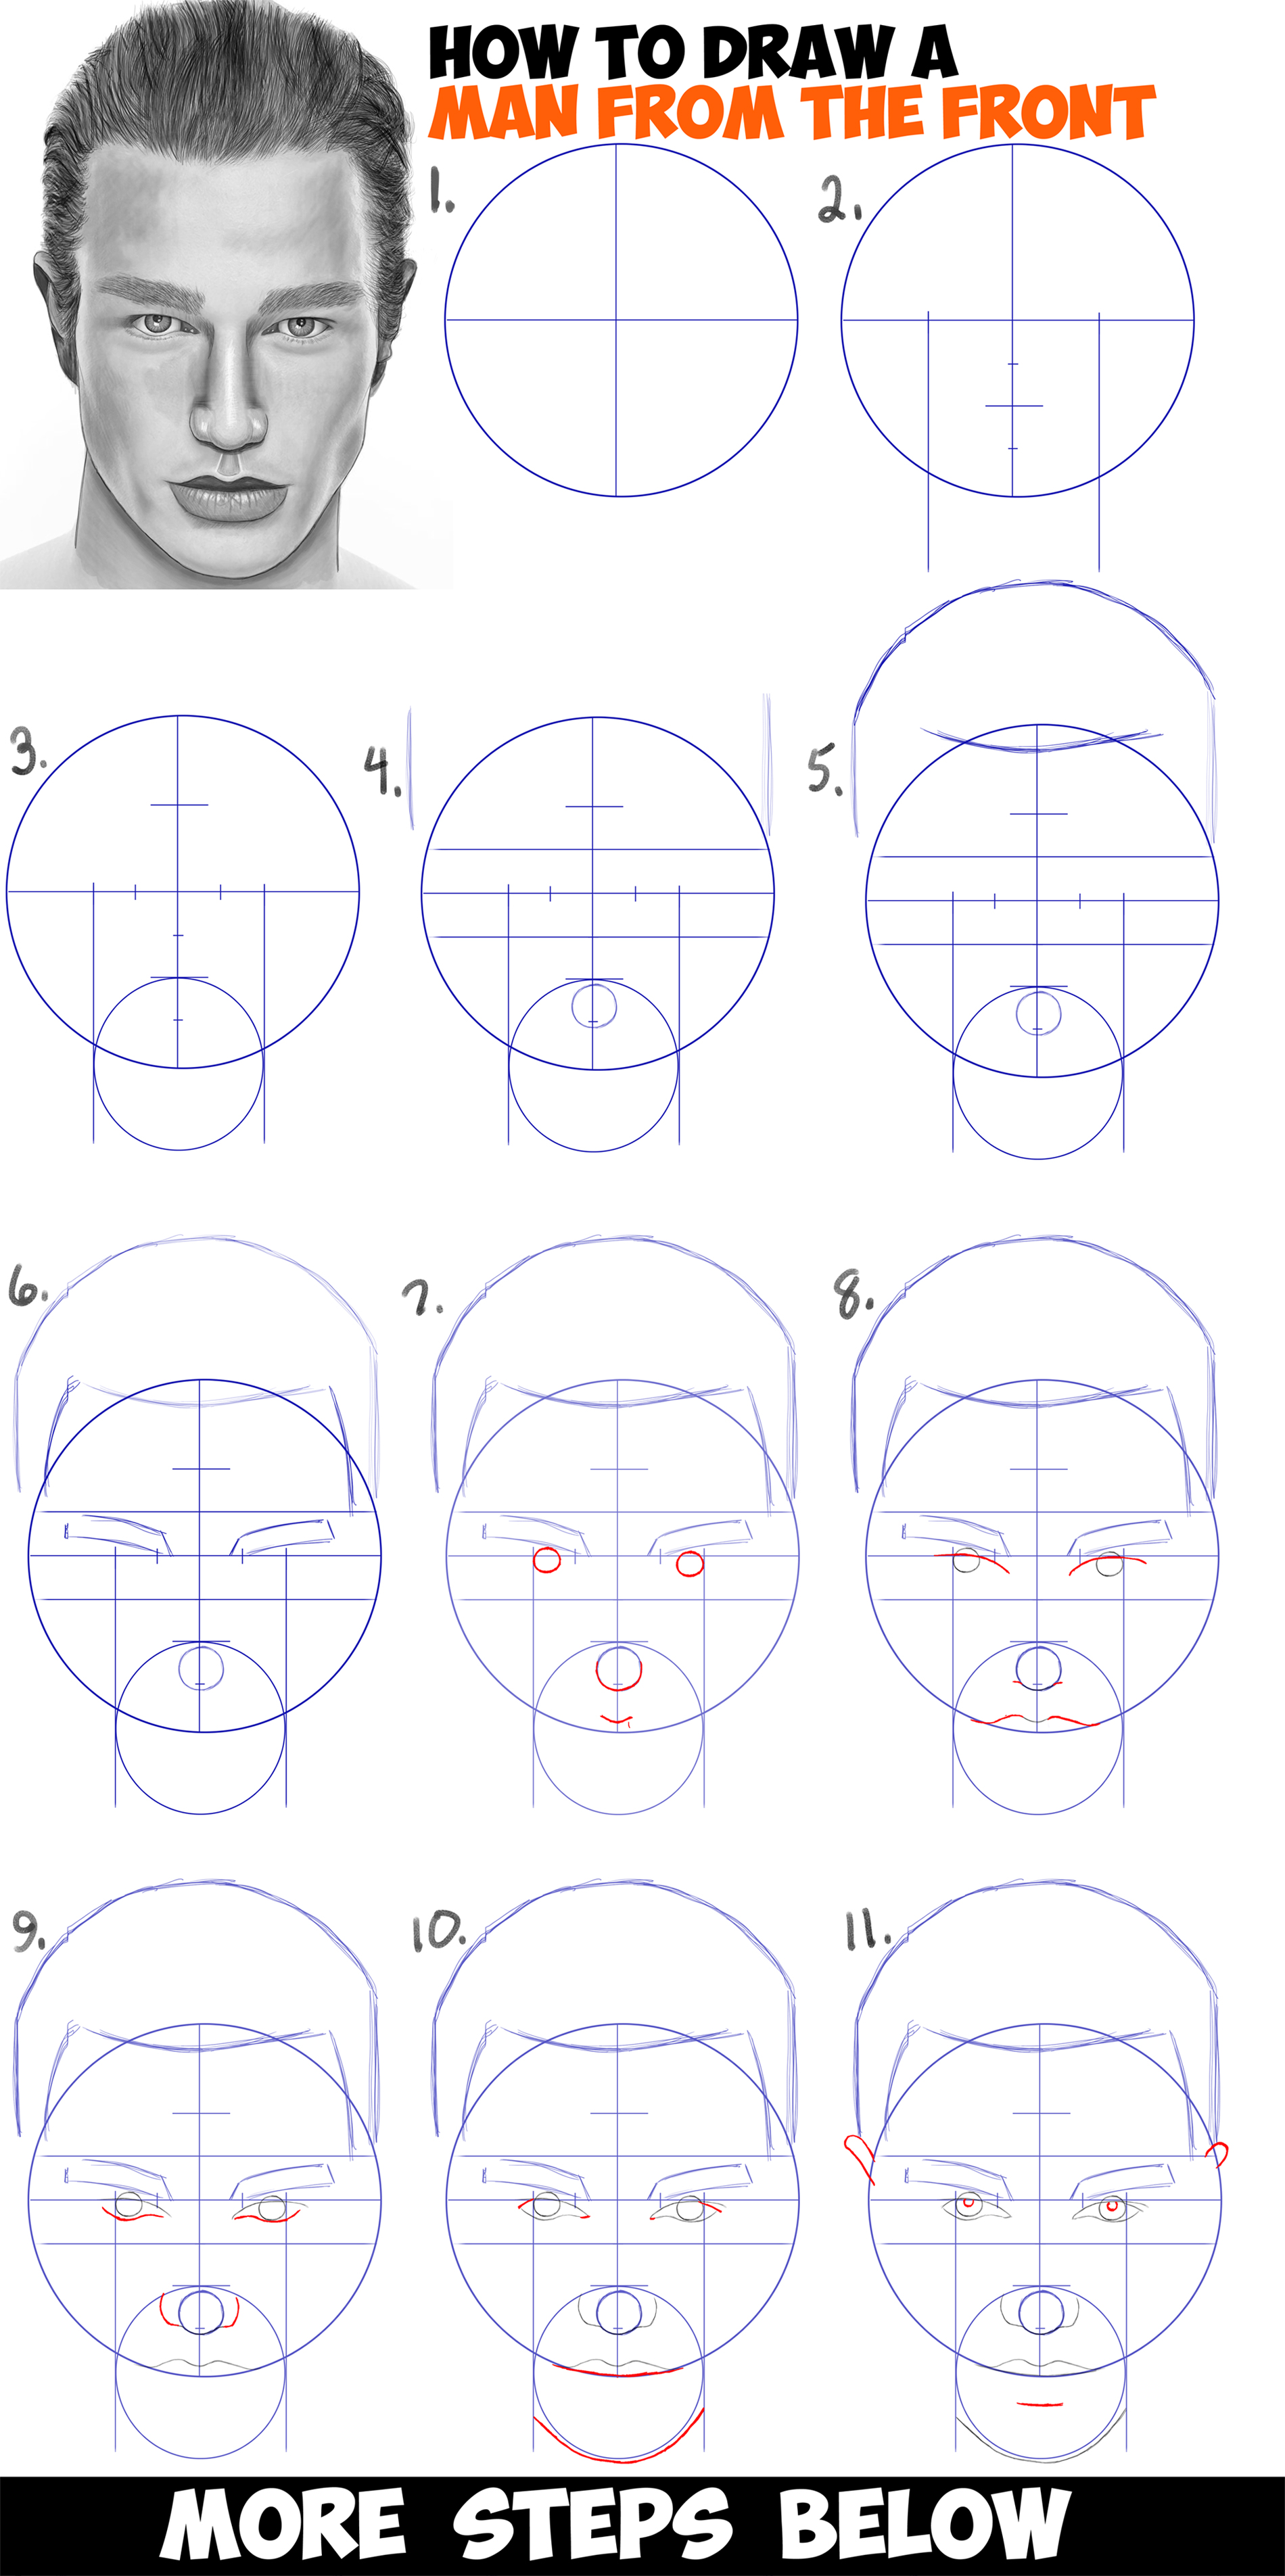 How to Draw a Black Man's Face - Really Easy Drawing Tutorial